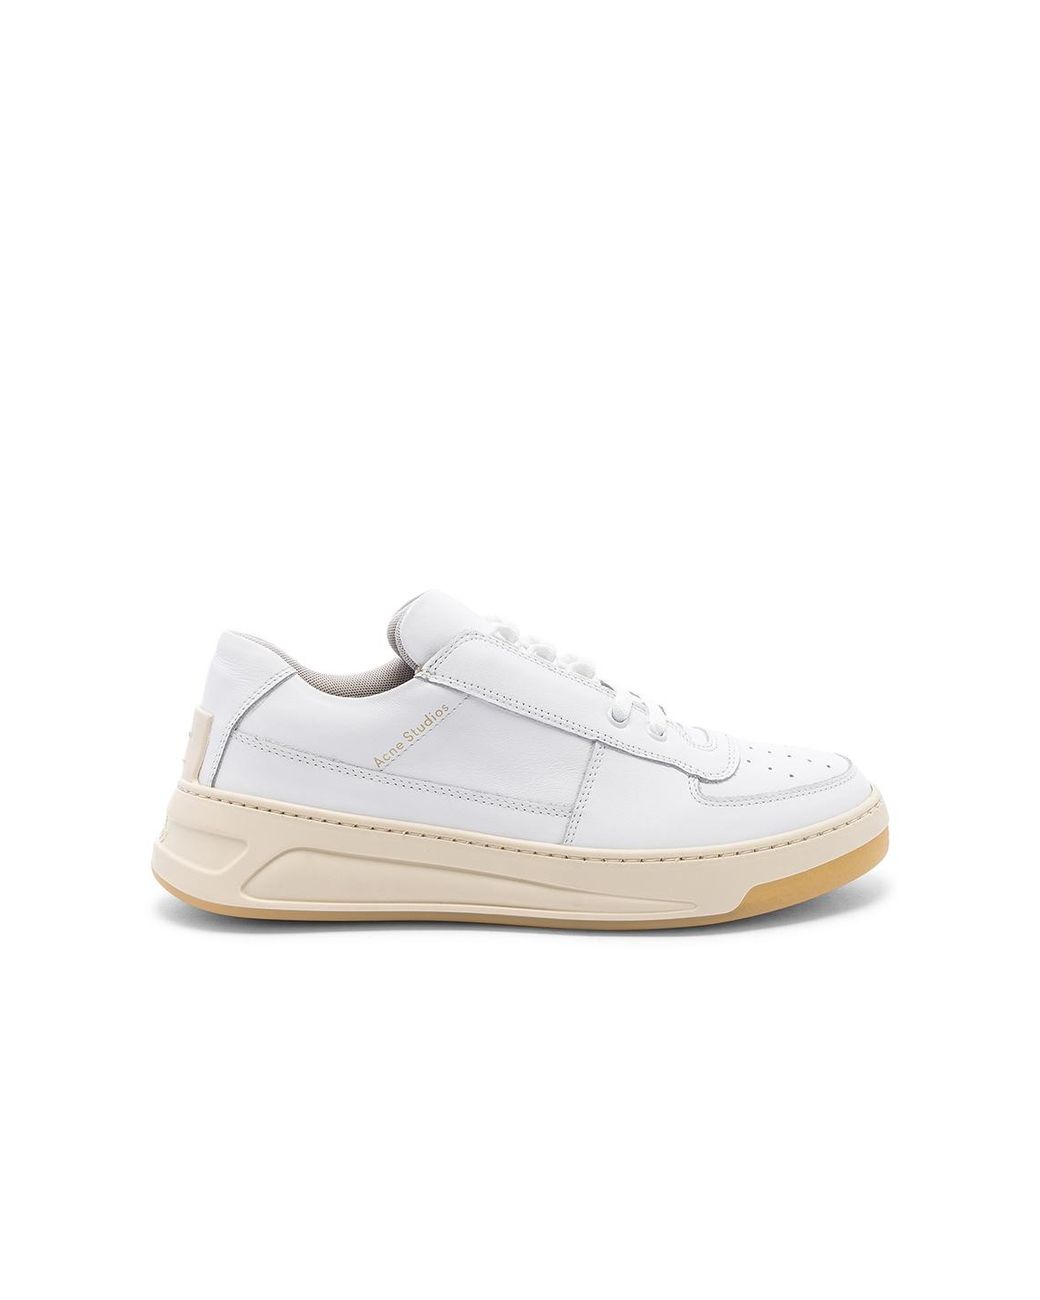 Perey Lace Up Sneakers in White Lyst